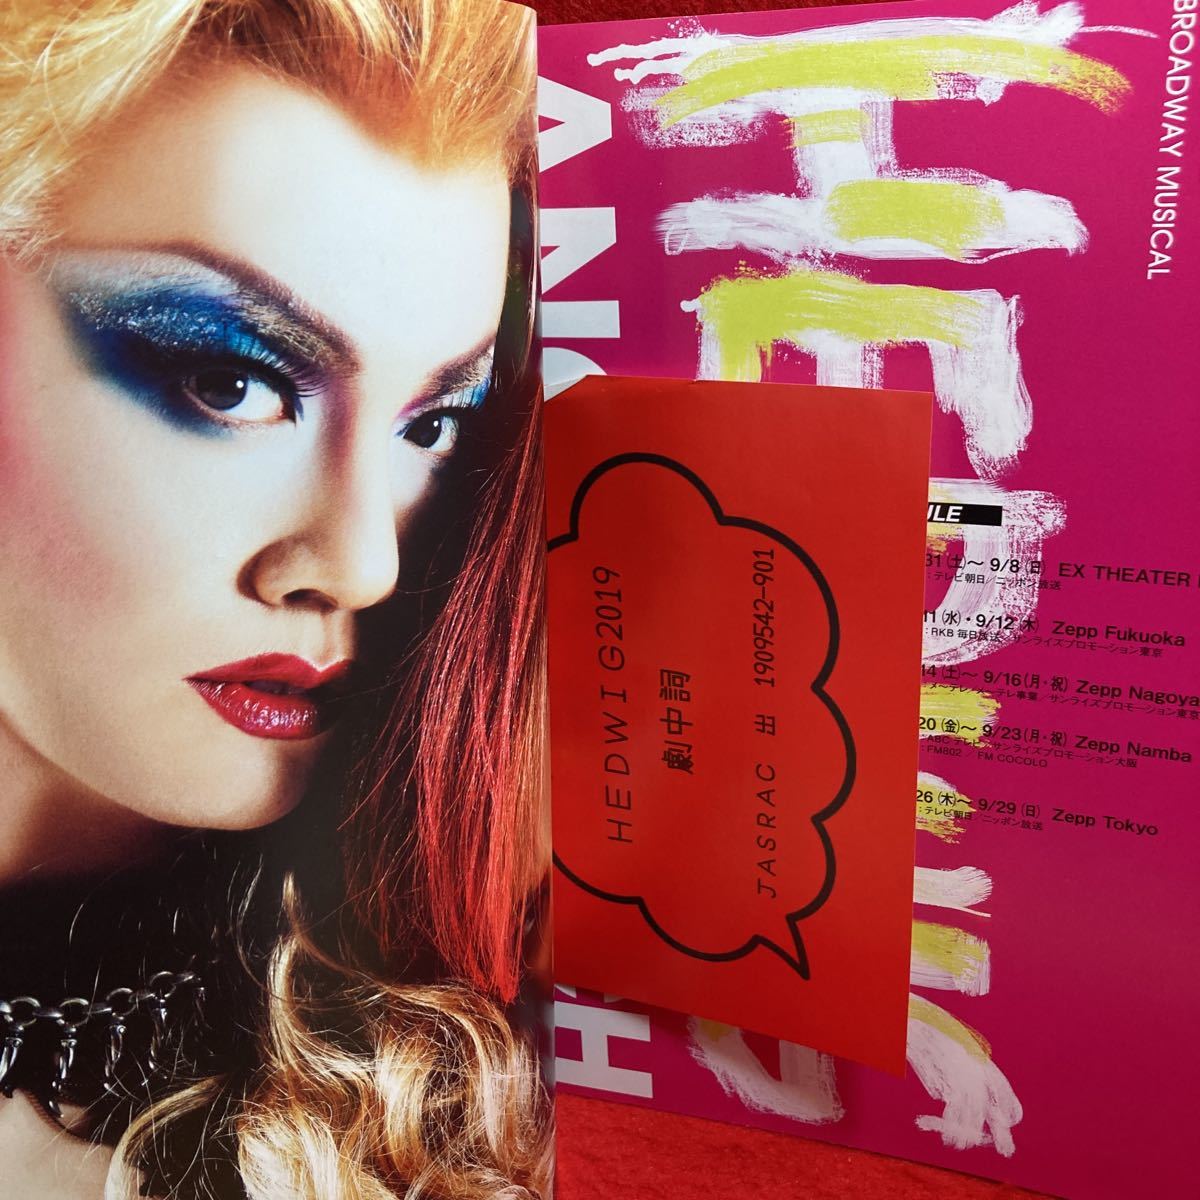 ▼HEDWIG AND THE ANGRY INCH 2019 MUSICALミュージカル パンフレット 浦井健治 女王蜂 アヴちゃん DURAN YUTARO 楠瀬タクヤ チラシ1枚付き_画像2